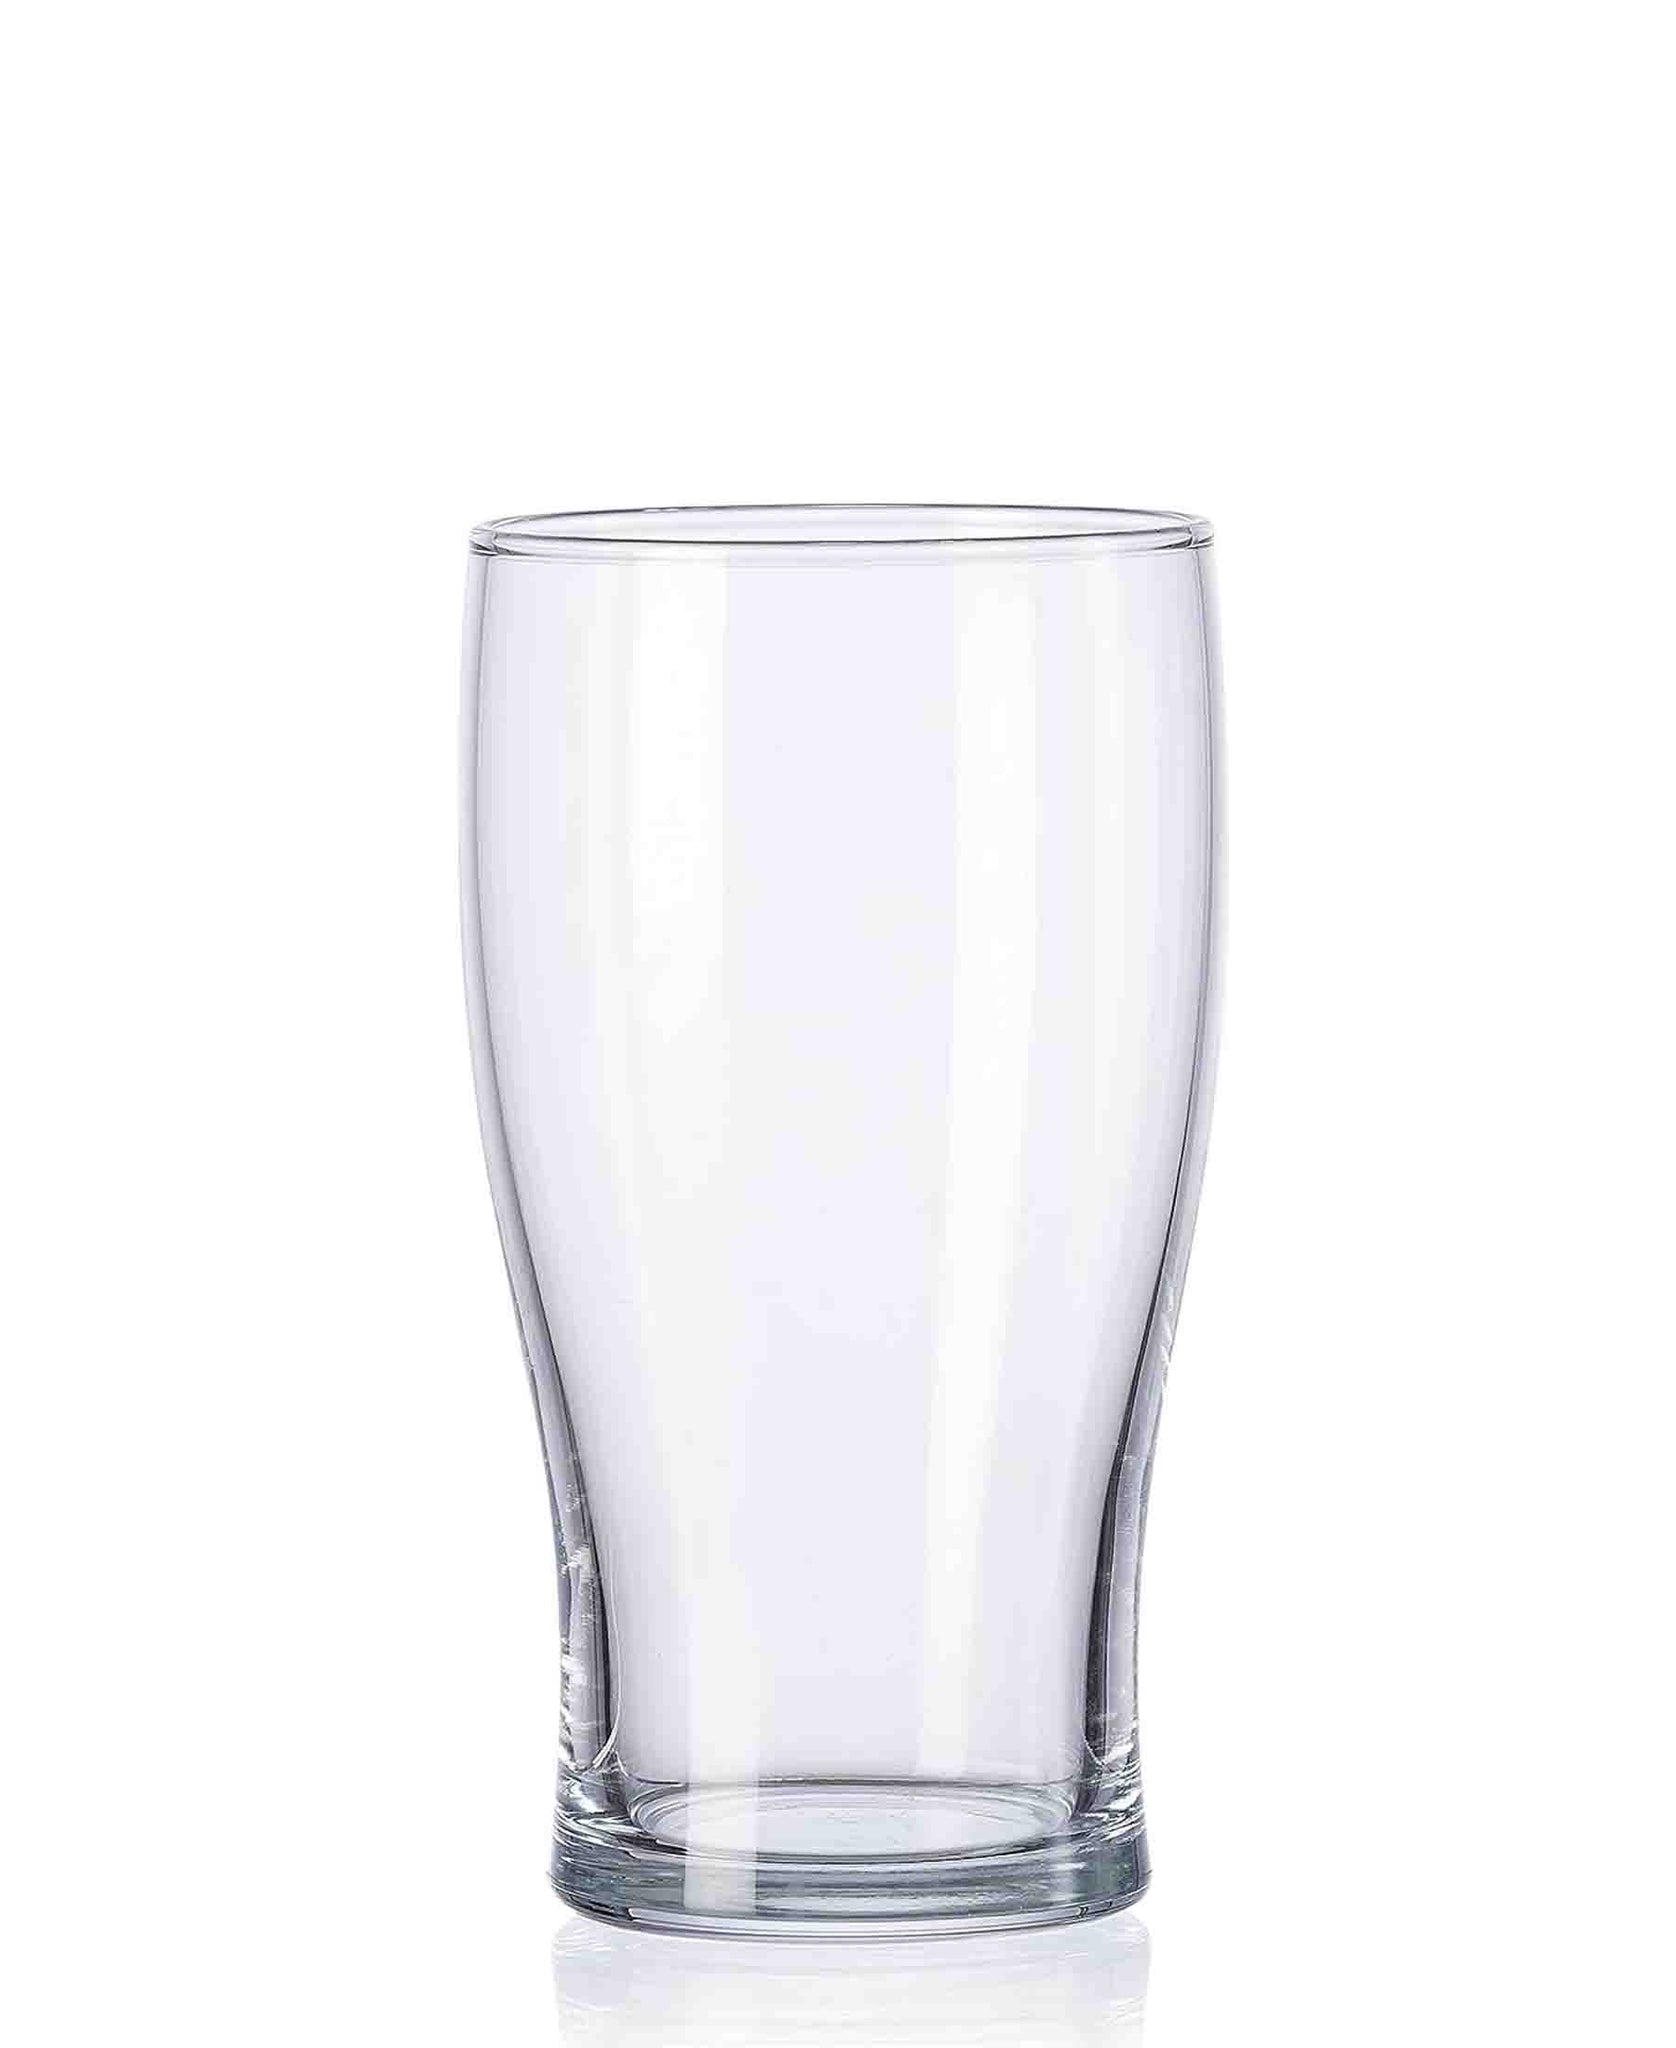 Izmir Collection 475ml Tulip Glass - Clear